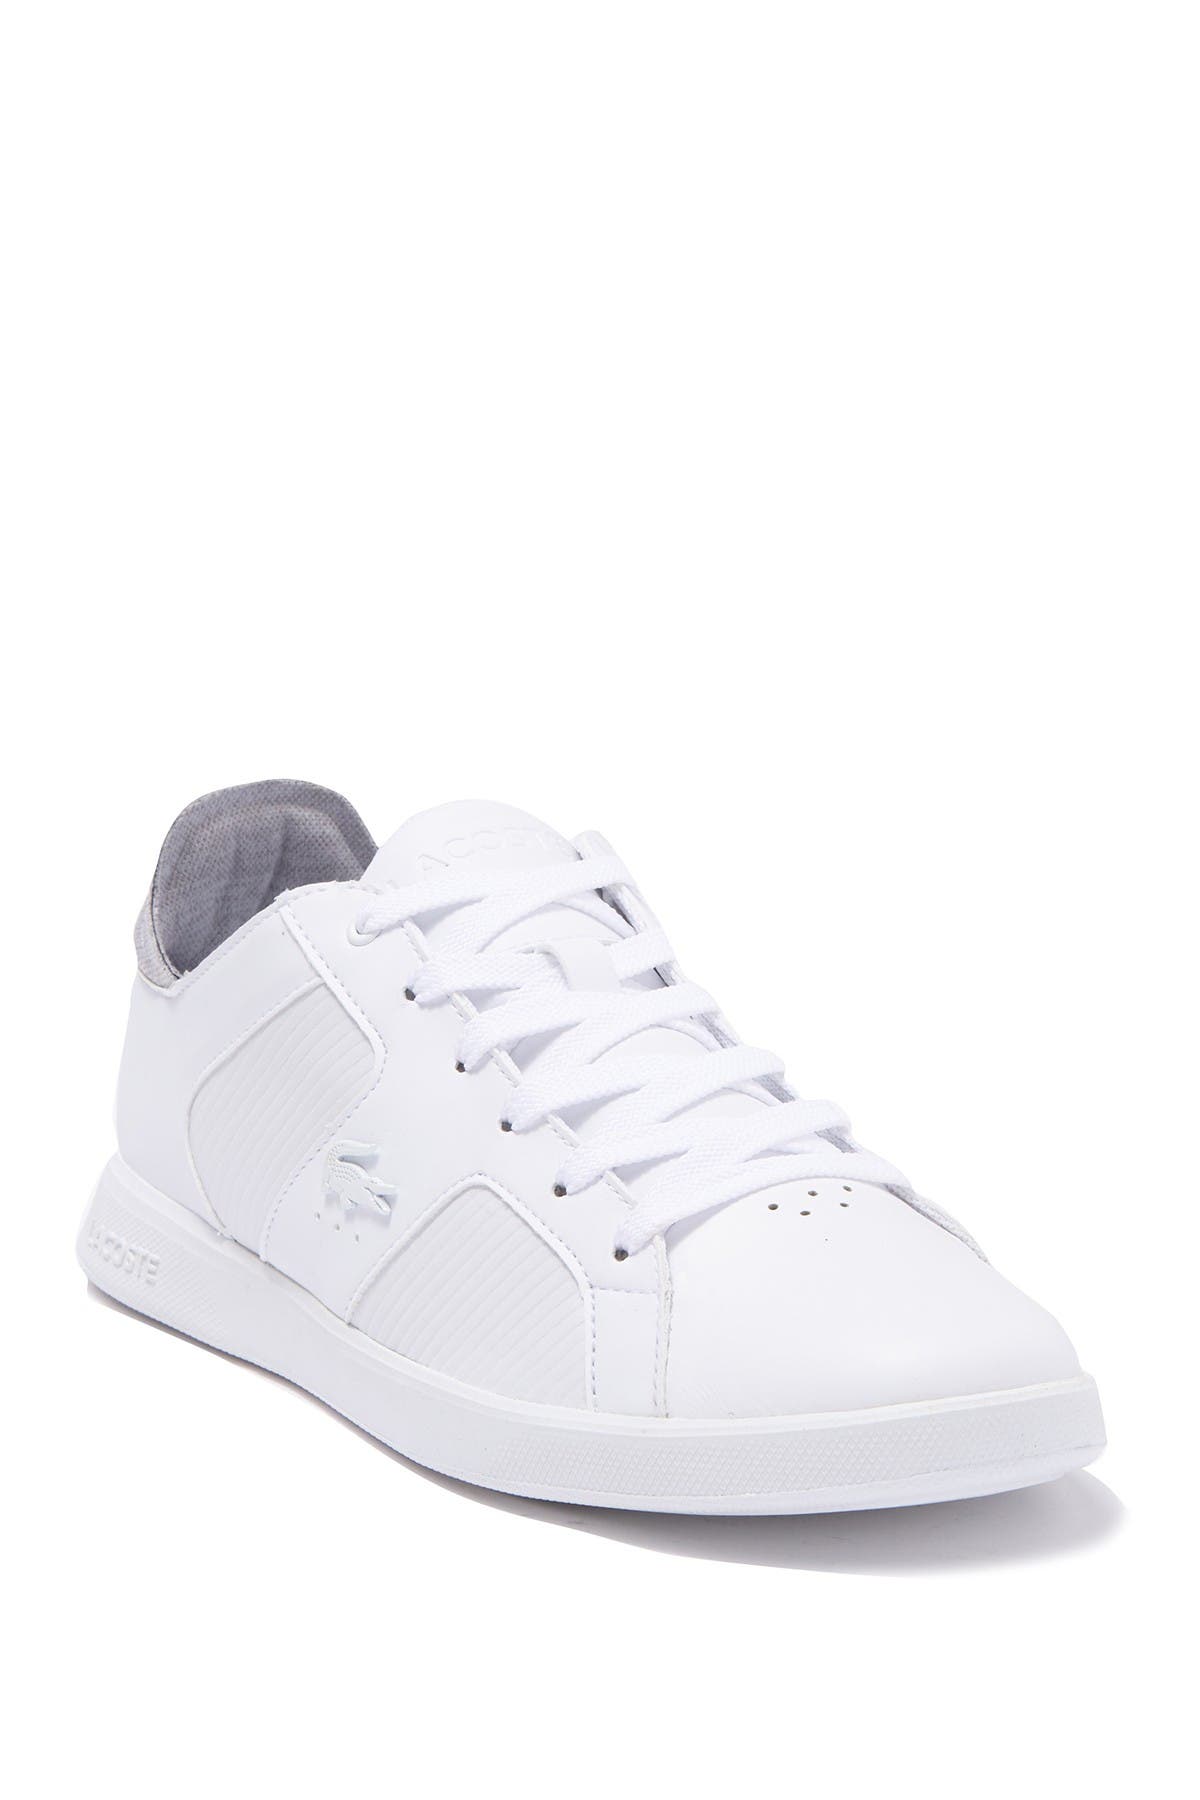 nordstrom rack lacoste shoes